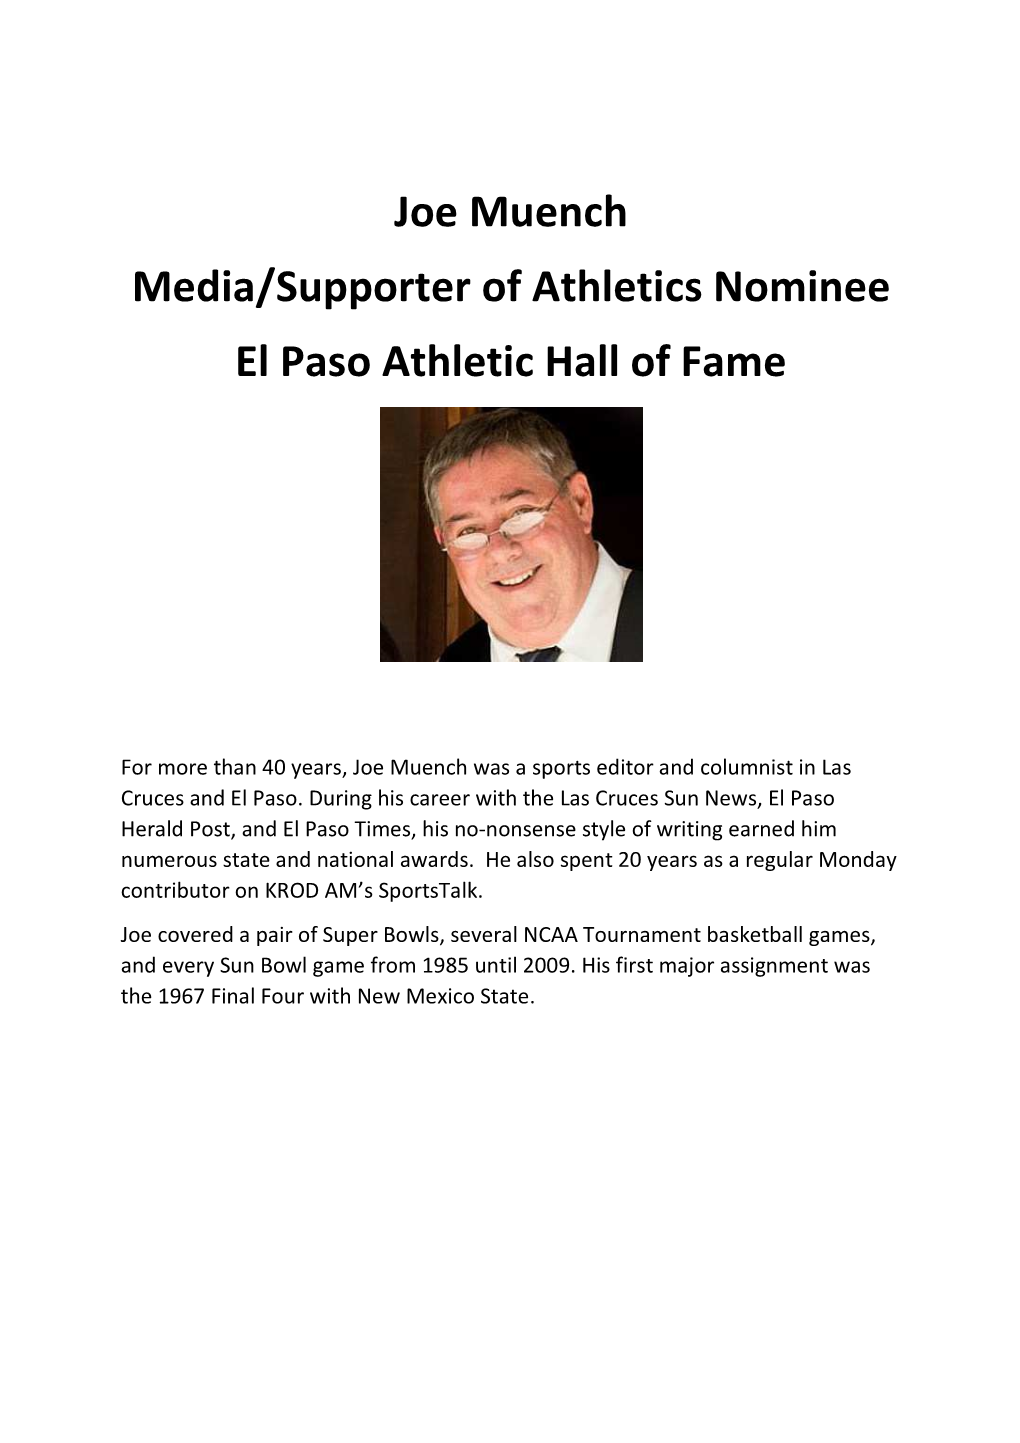 Joe Muench Media/Supporter of Athletics Nominee El Paso Athletic Hall of Fame